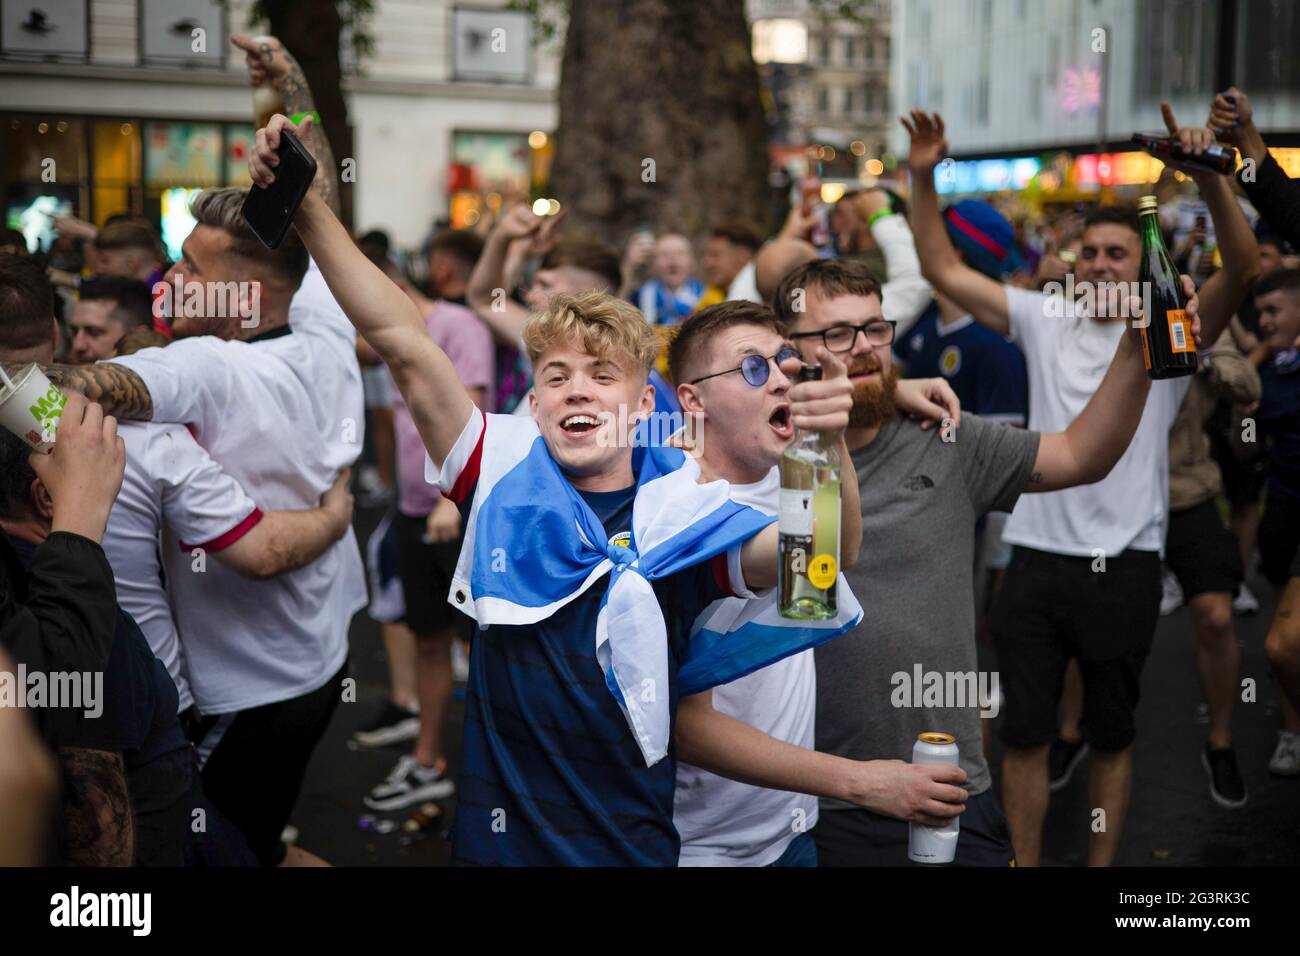 London, UK. 17th June, 2021. Scotland Football fans are seen celebrating  before the match. Football fans supporting Scotland arrived in London today  prior to the UEFA football match between England and Scotland